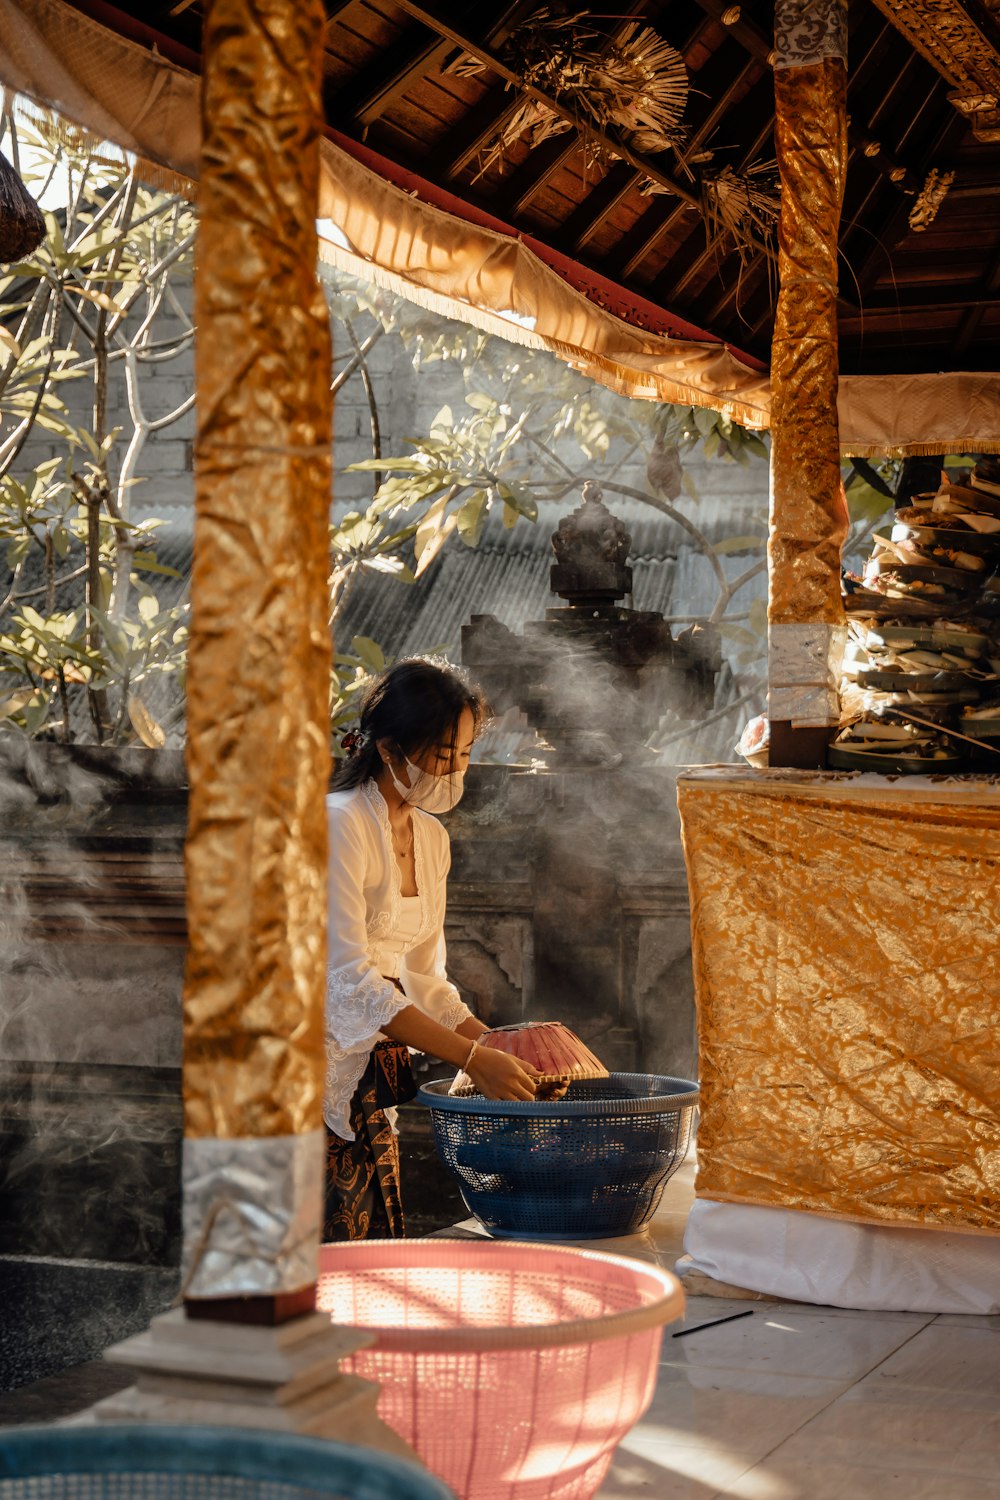 a woman cooking food in a large bowl